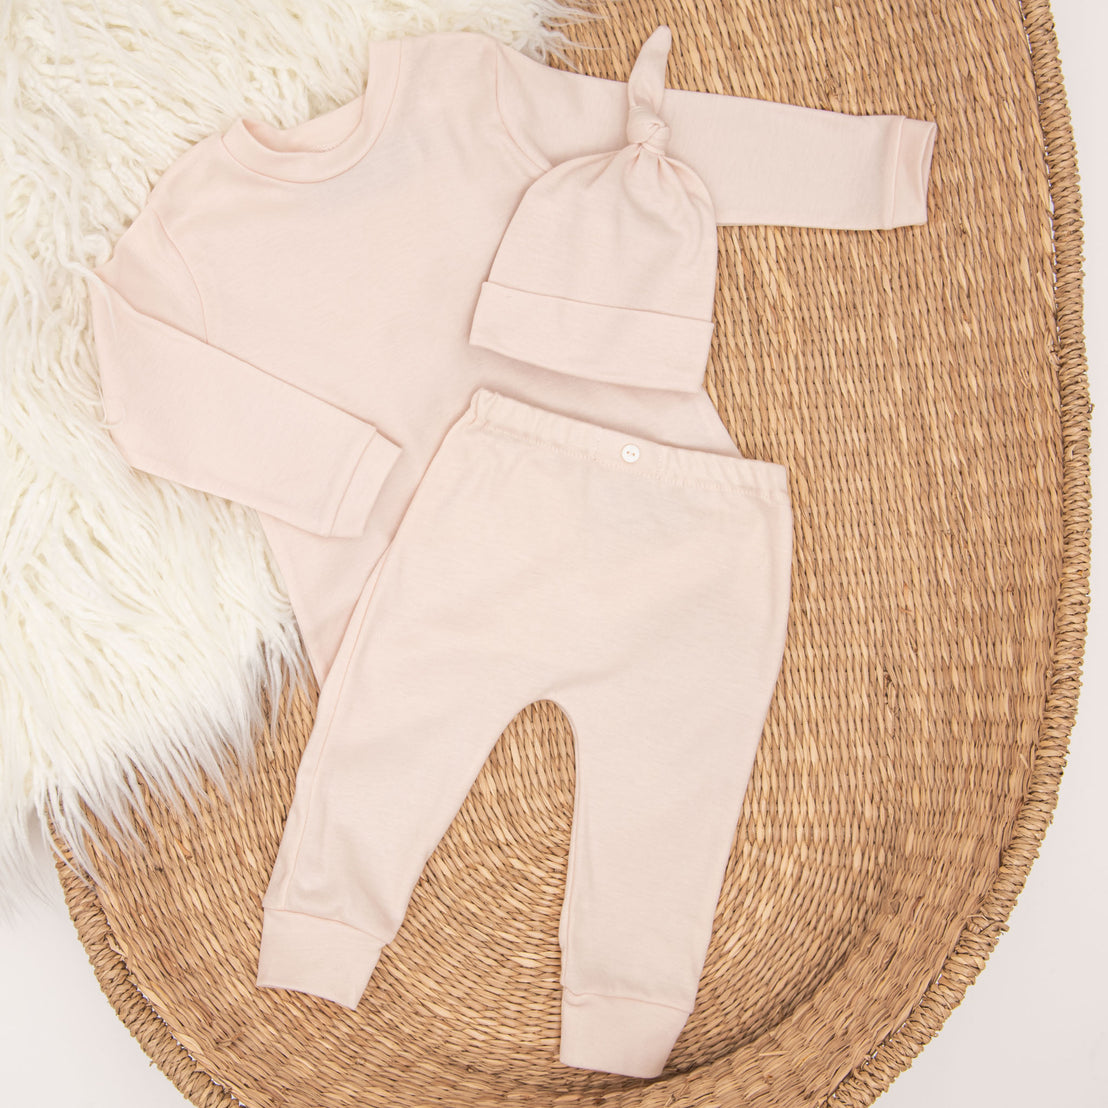 A flat lay of a baby's light pink coming home outfit including theAva Pima Top & Leggings set, and matching Ava Pima Knot Cap, arranged on a wicker basket with a white fluffy rug beneath.